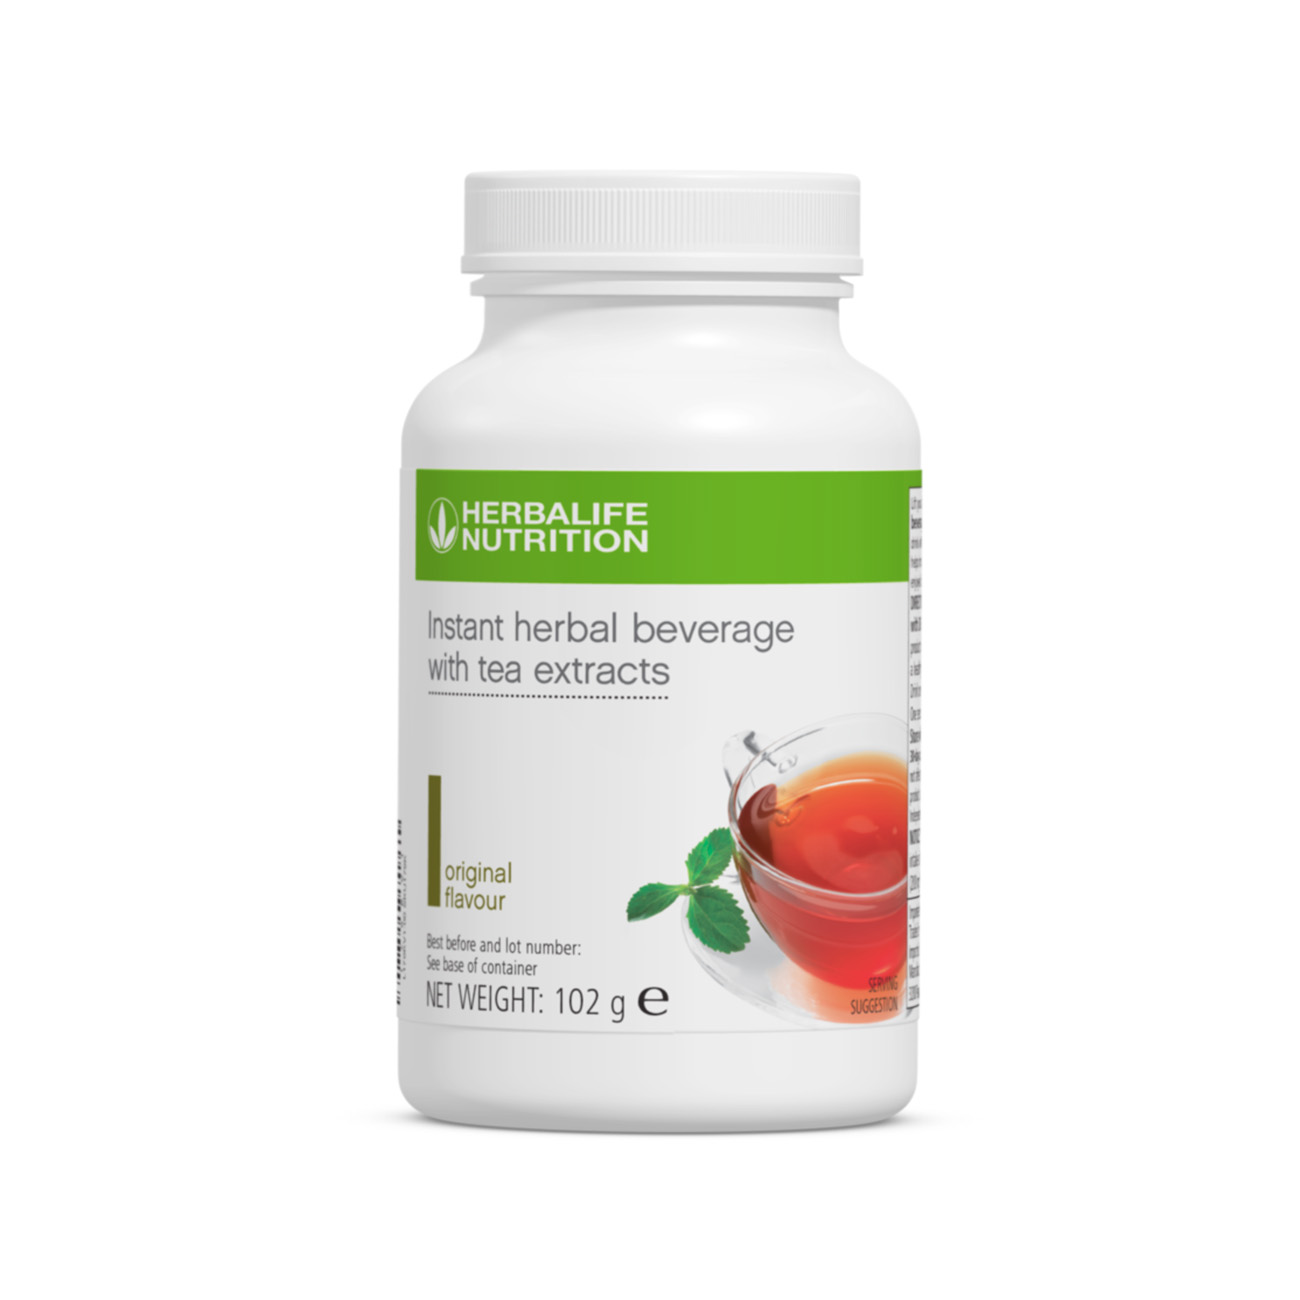 Instant Herbal Beverage Original flavour is our signature tea blend - a low-calorie herbal drink to lift your day.